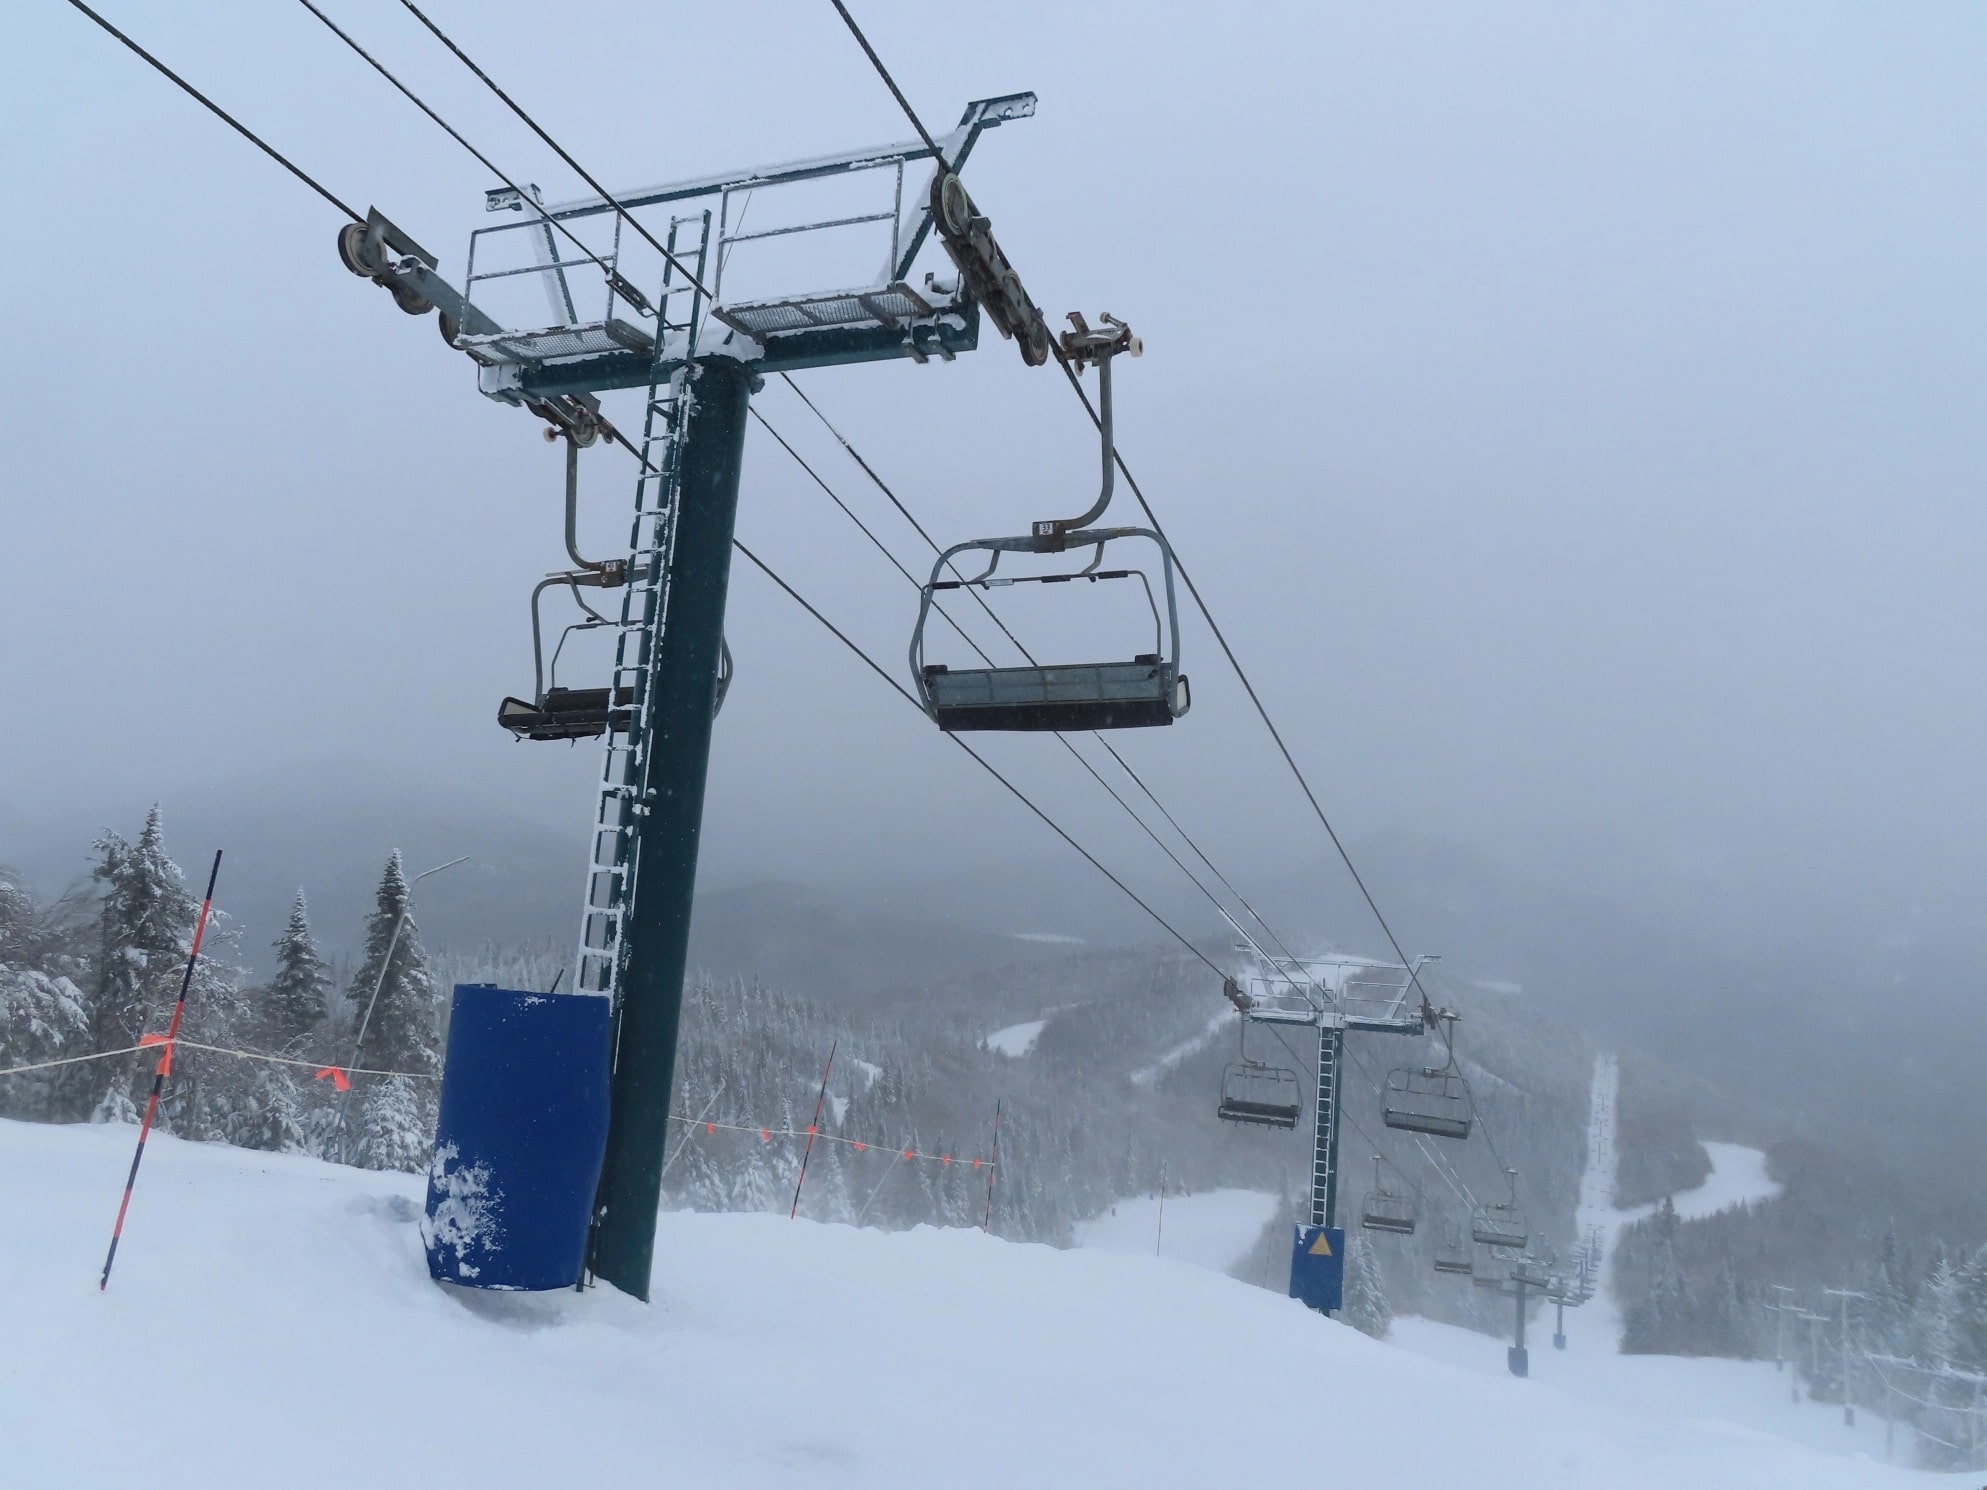 The coldest lifts at ski resorts